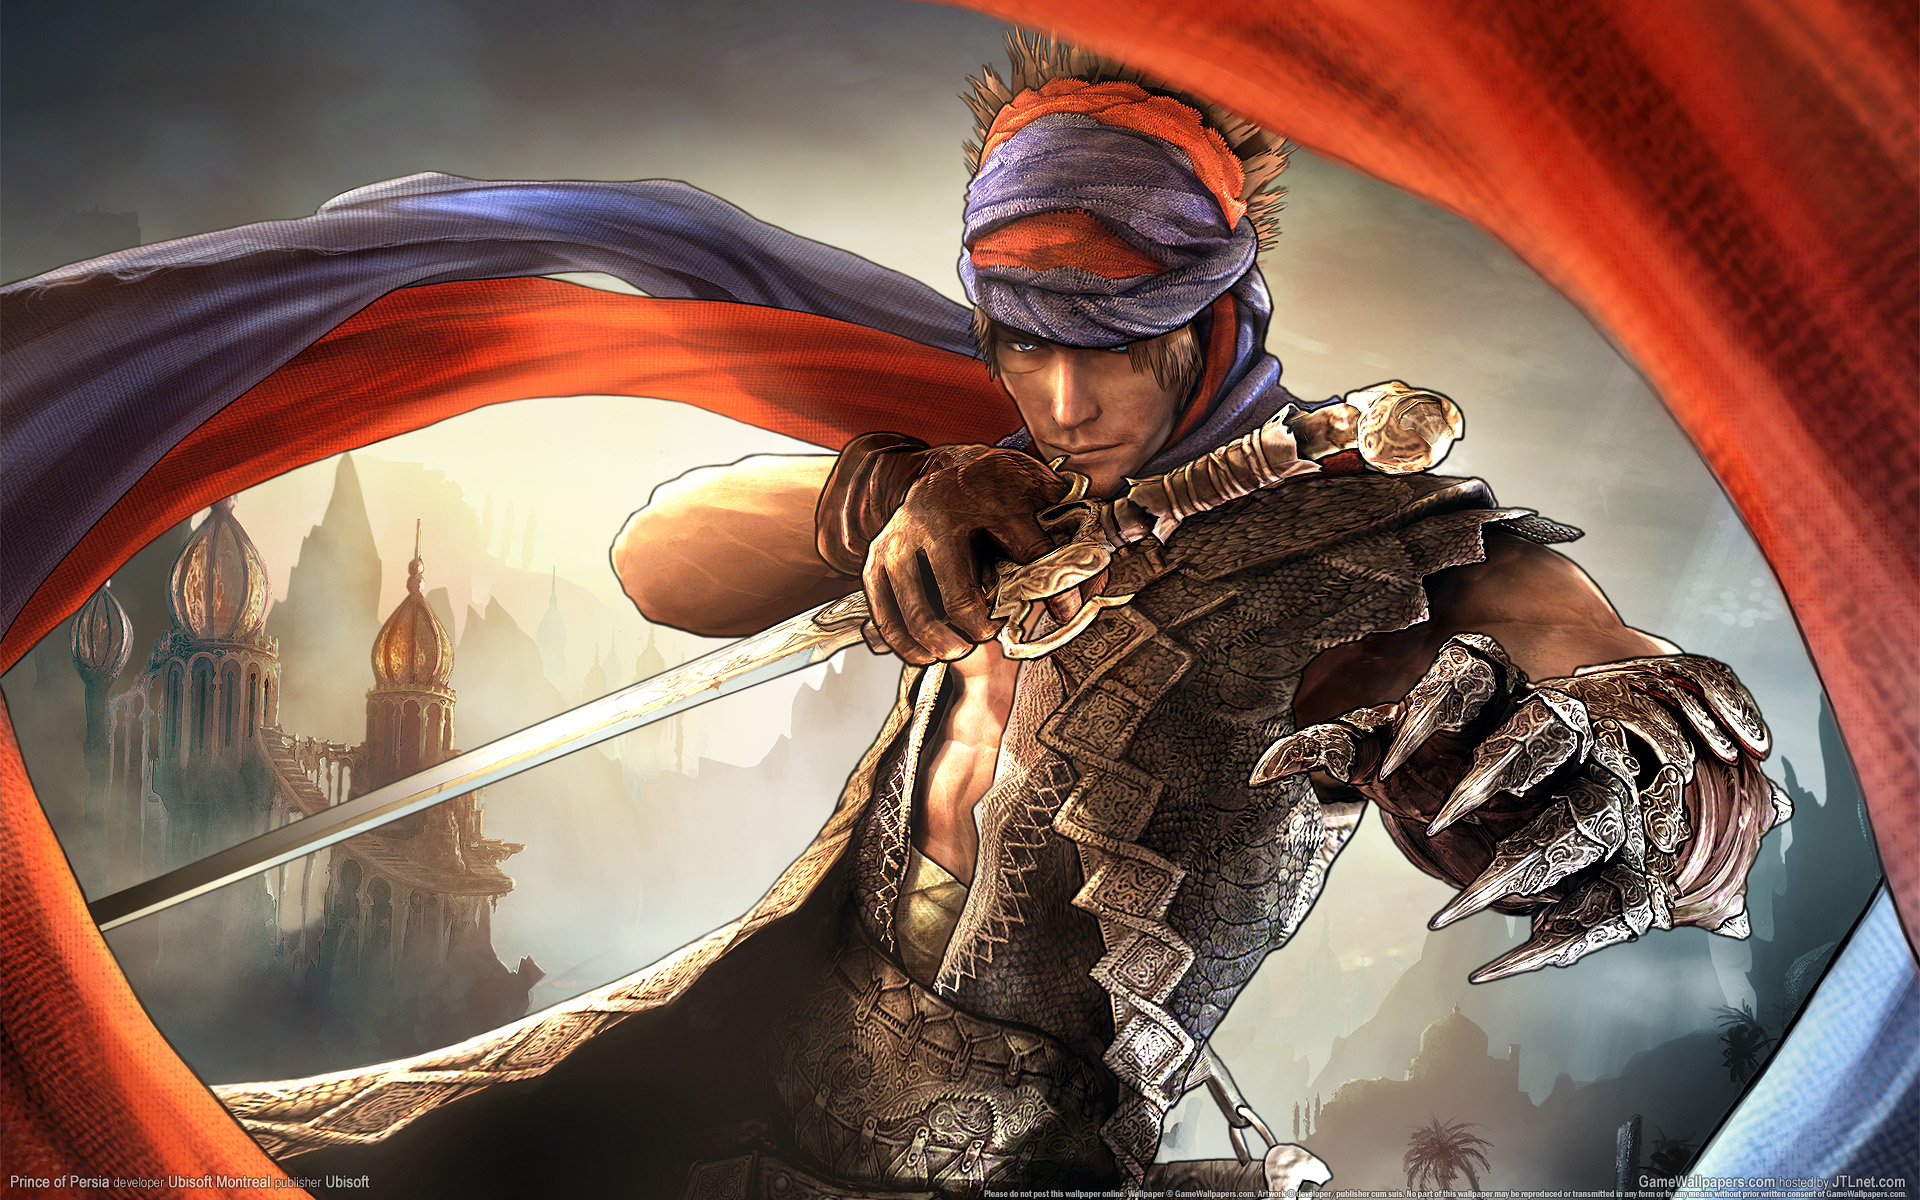 prince wallpaper hd,action adventure game,cg artwork,pc game,games,warlord